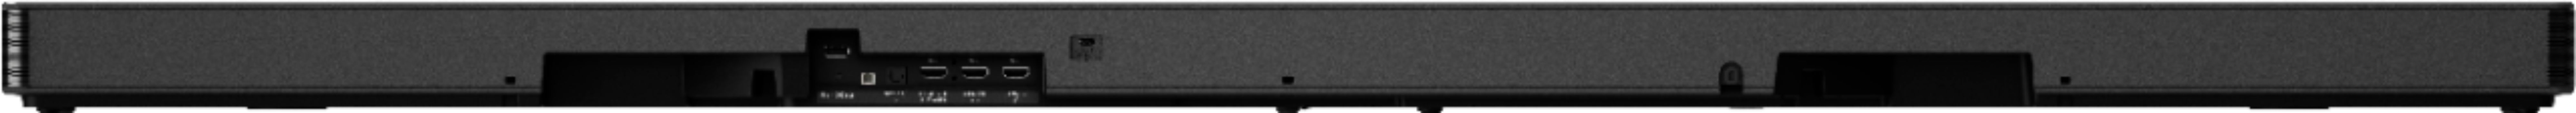 Back View: LG - 7.1.4-Channel 770W Soundbar System with Wireless Subwoofer and Dolby Atmos with Google Assistant - Black